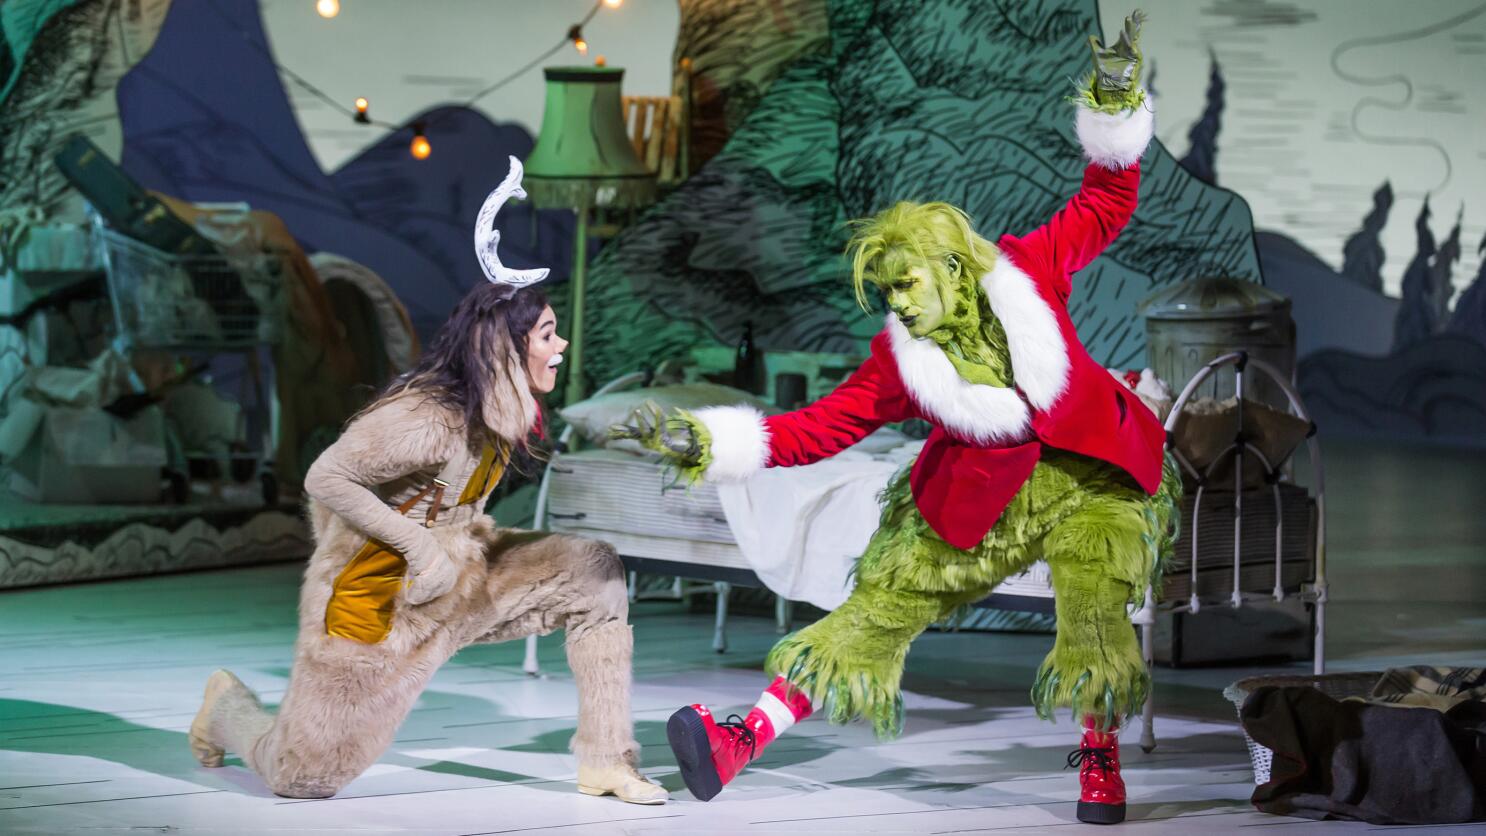 Freeform - Love the Grinch? You will love tonight's lineup on ABC